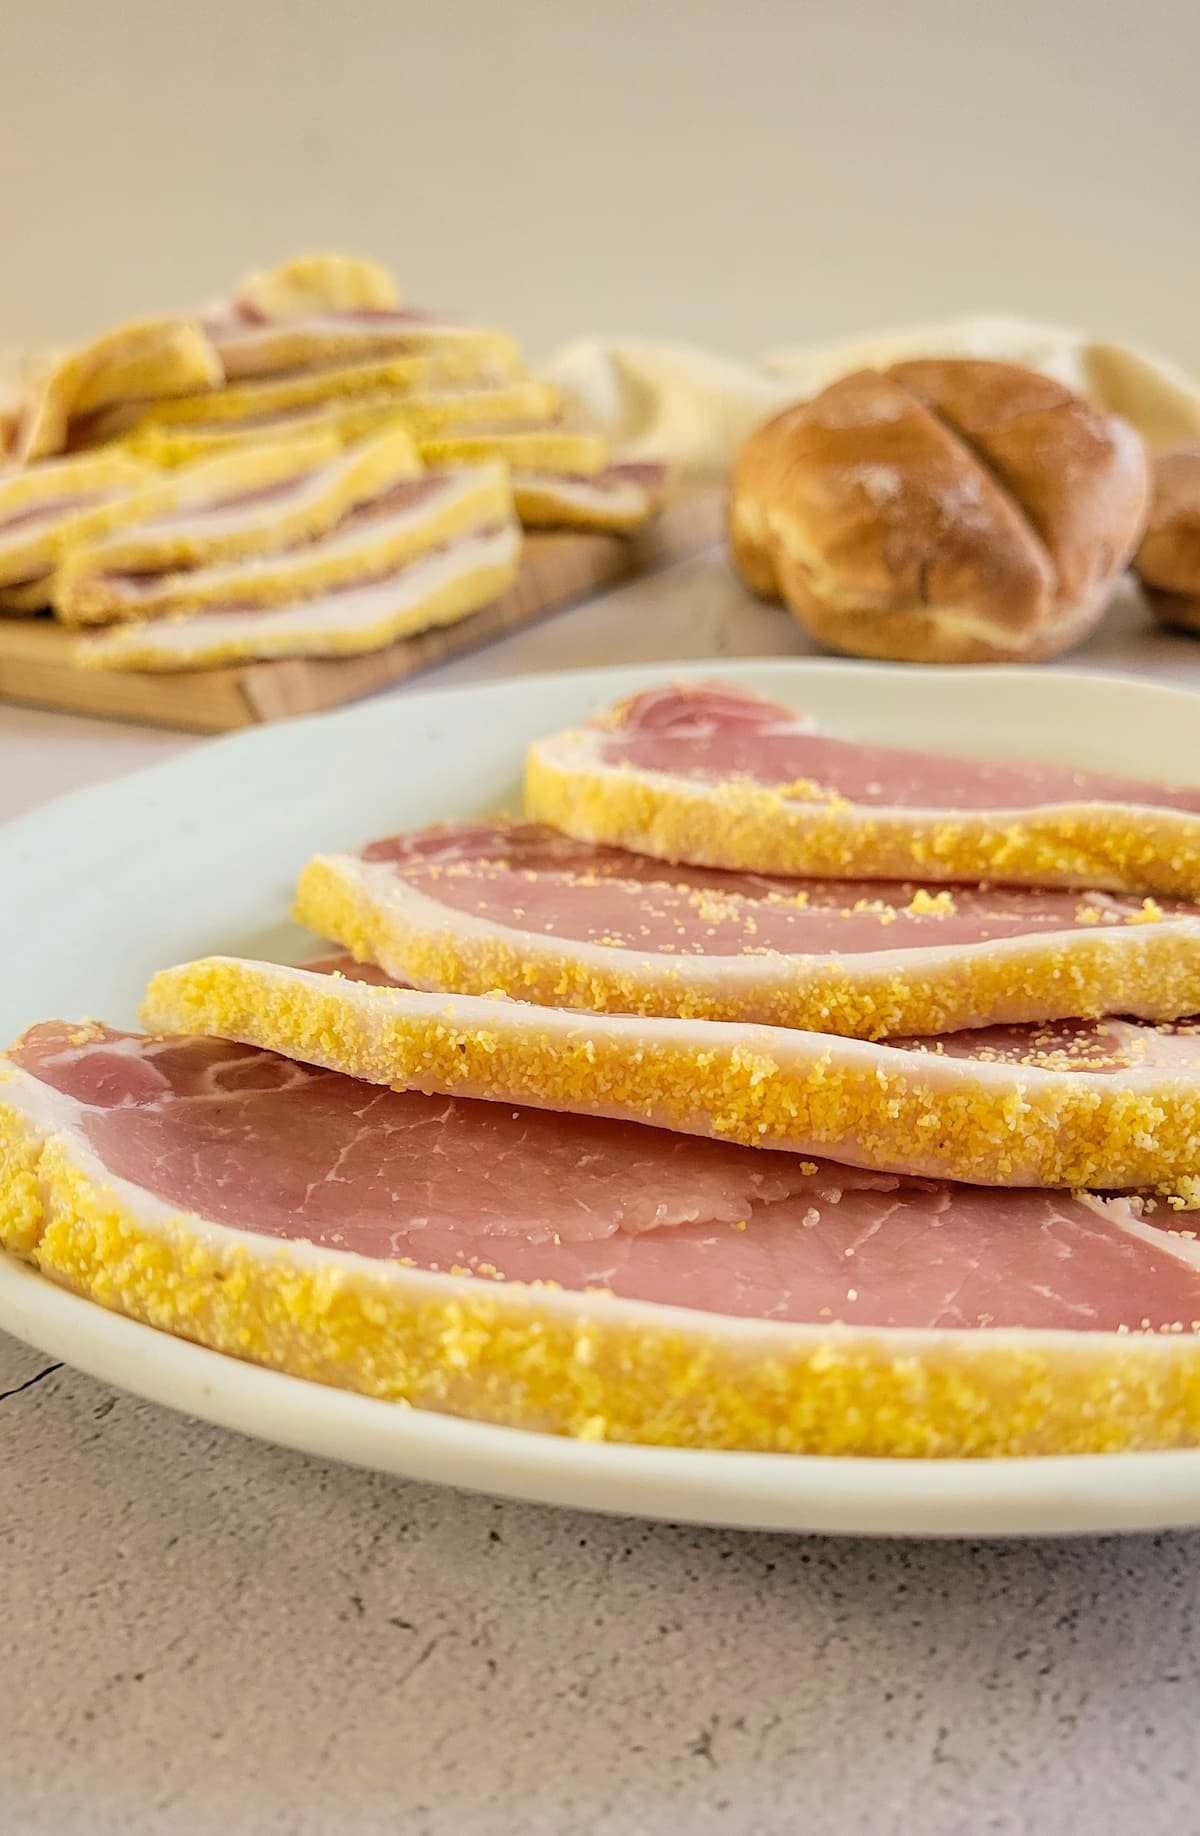 raw slices of peameal bacon on a plate, more in the background with buns